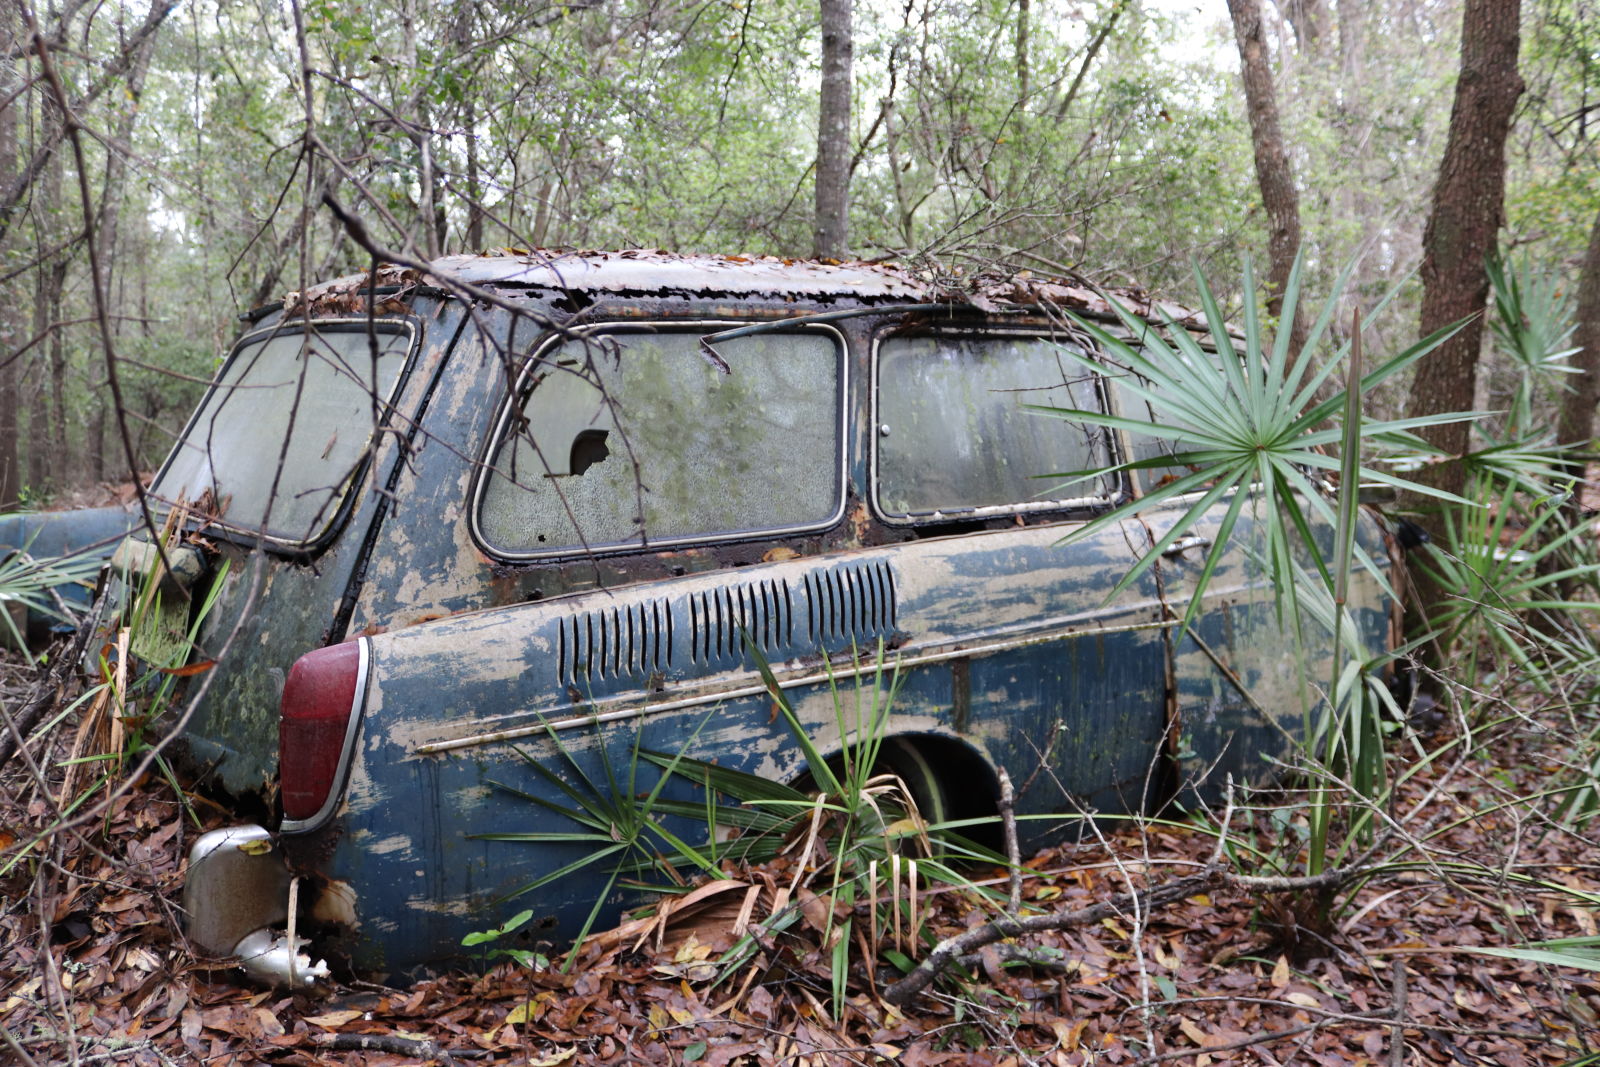 Illustration for article titled GHOST CARS ROTTING IN THE MISSISSIPPI SWAMP